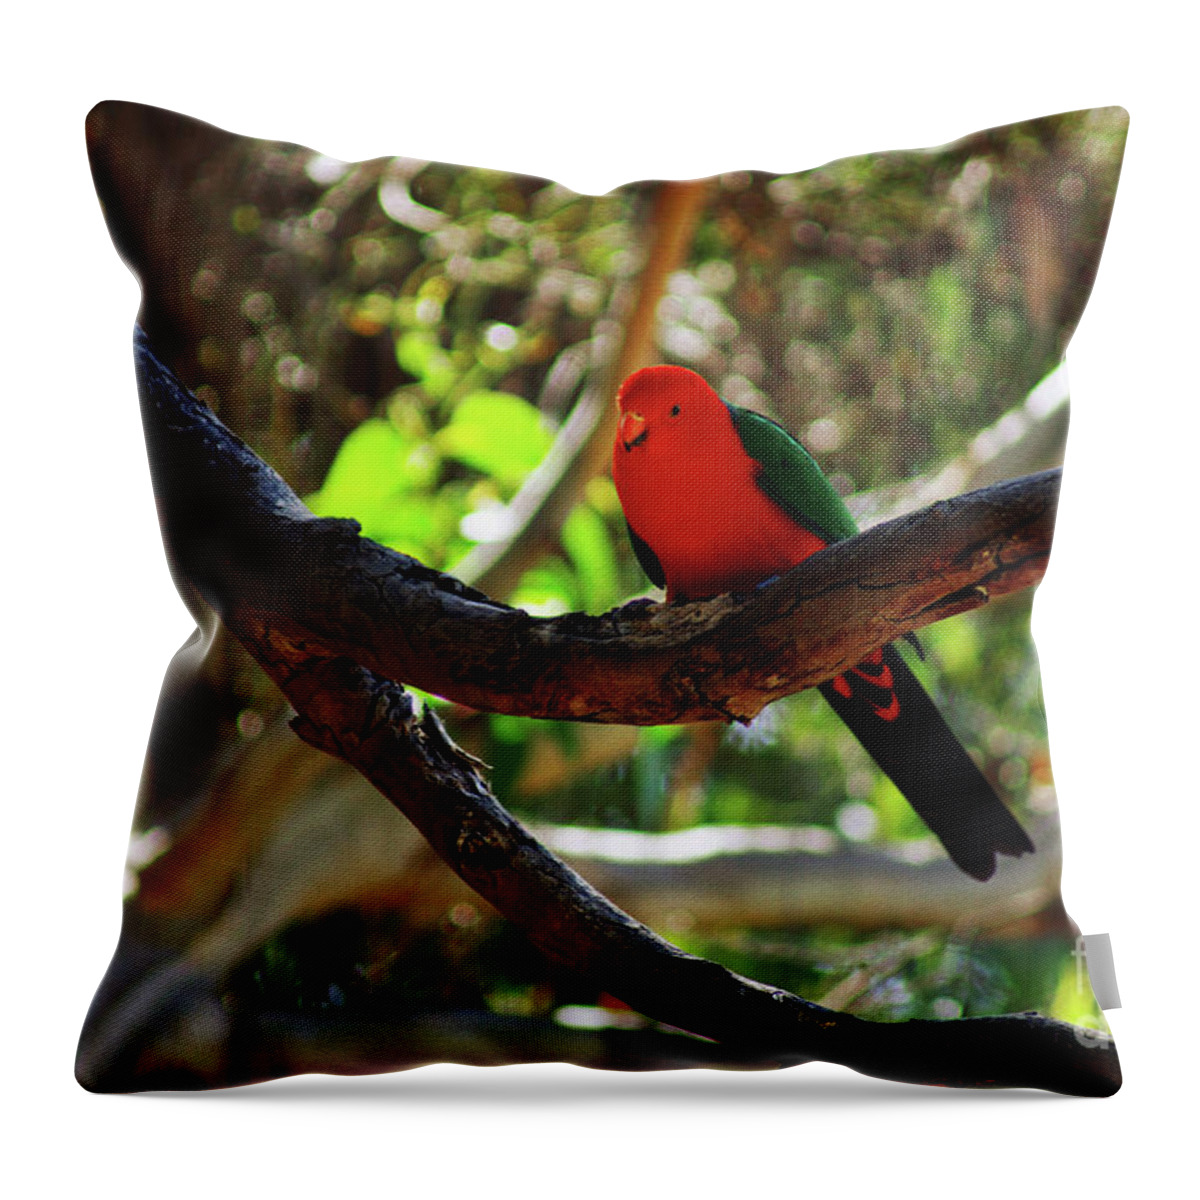 King Parrot Throw Pillow featuring the photograph King Parrot #3 by Cassandra Buckley